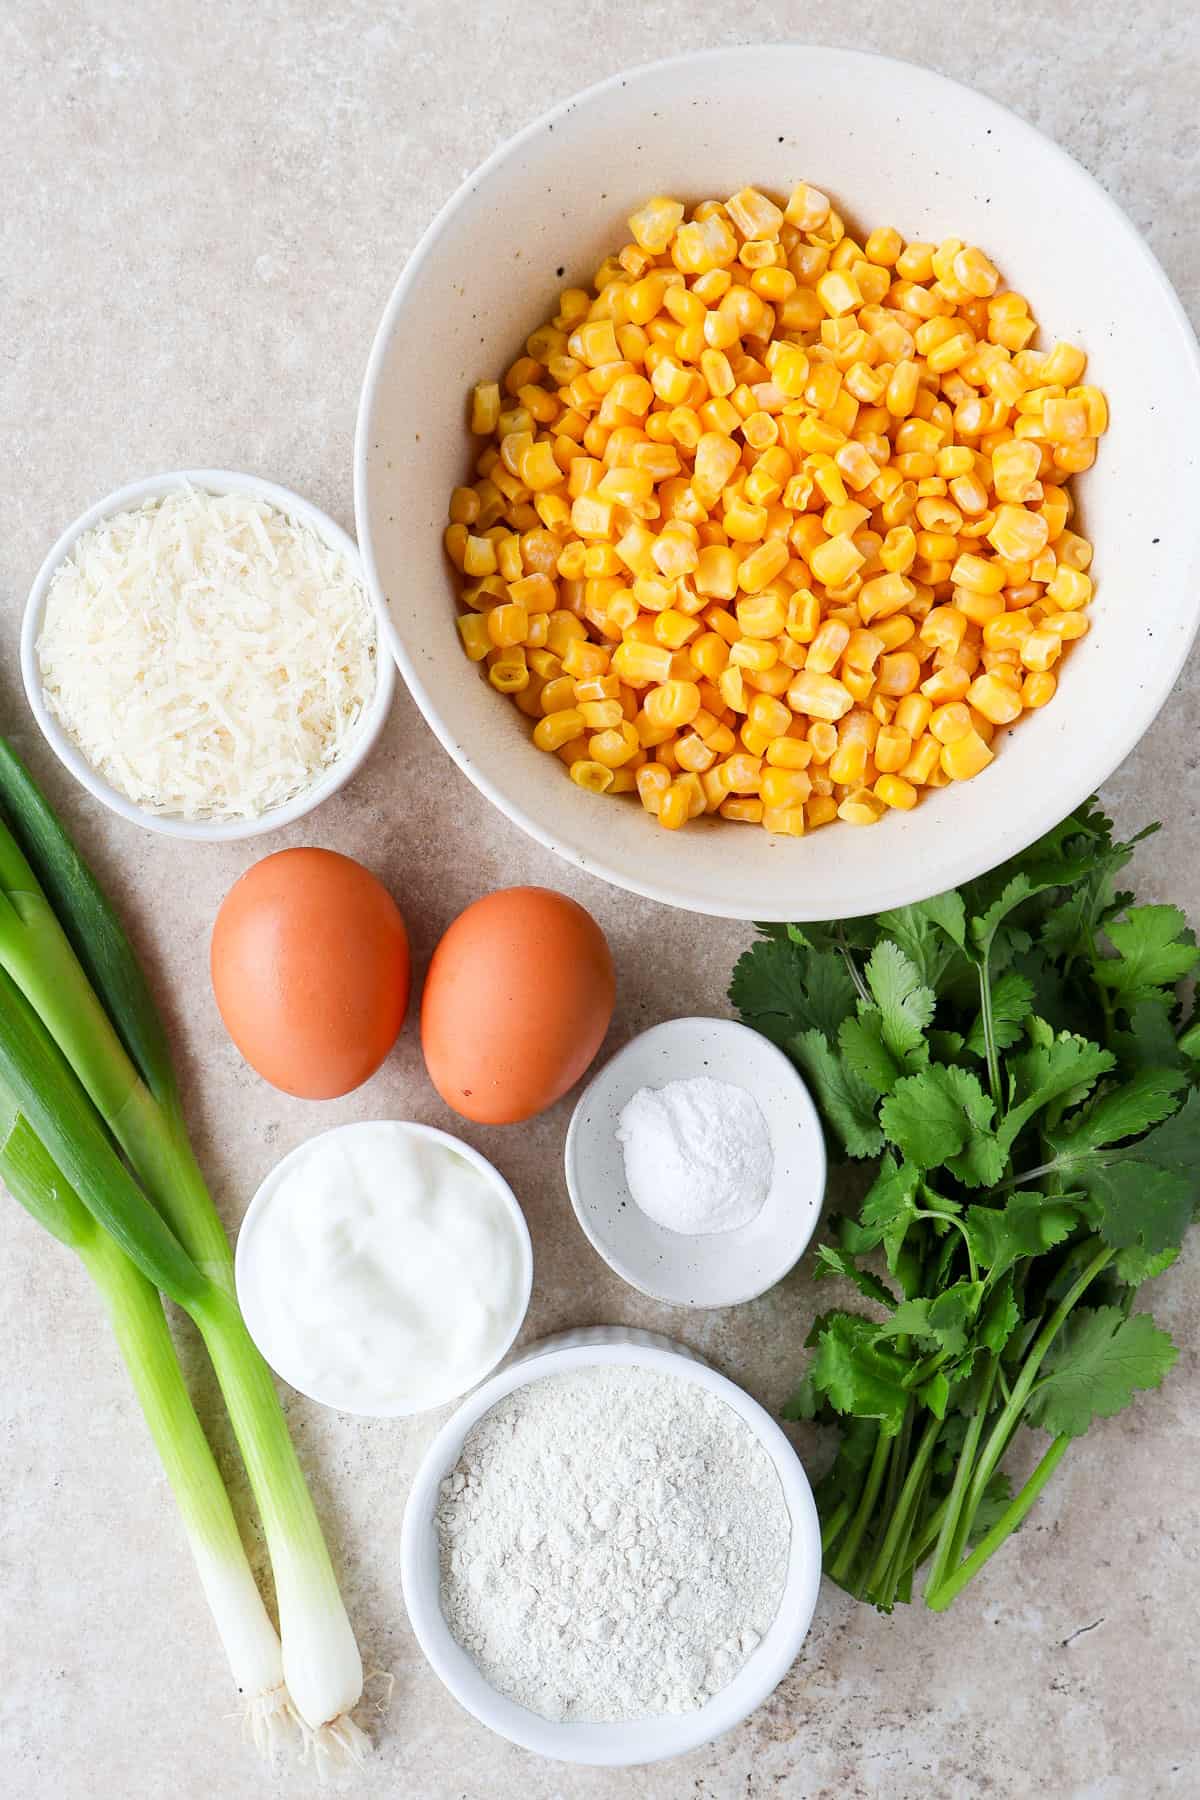 Ingredients shown to make fritters.